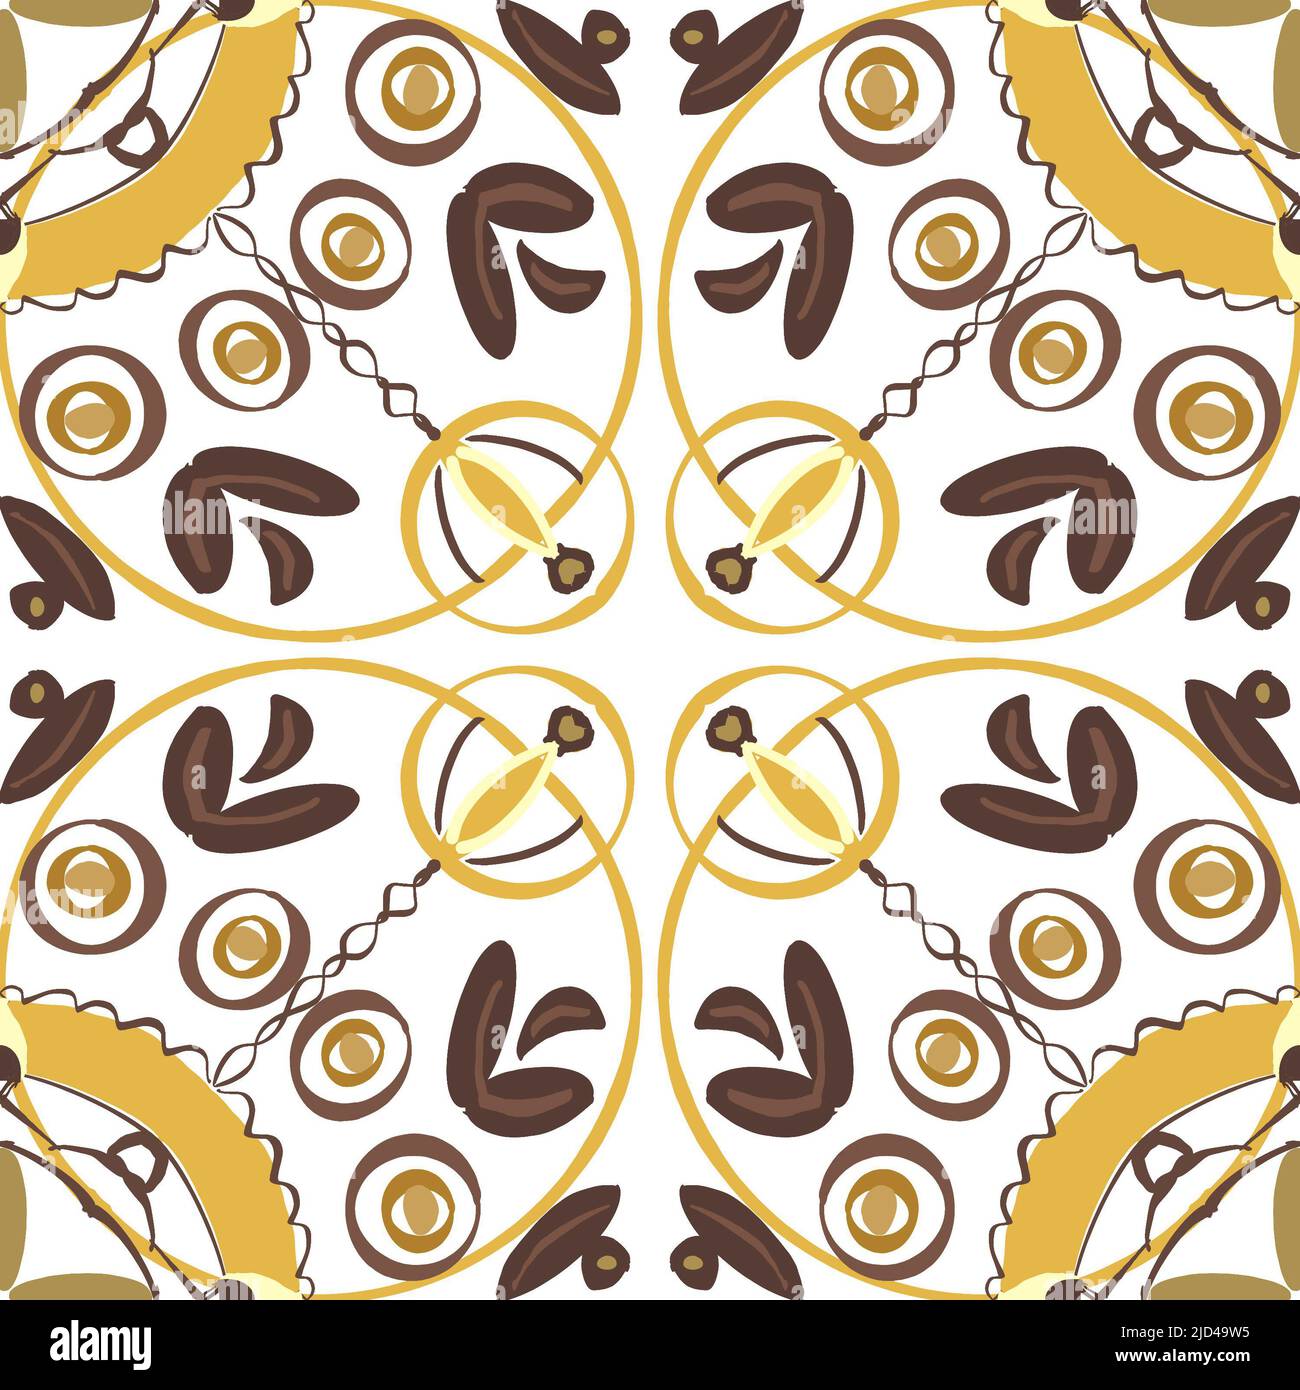 Hand painted mandala style in brown and yellow seamless surface pattern repeat. Stock Photo